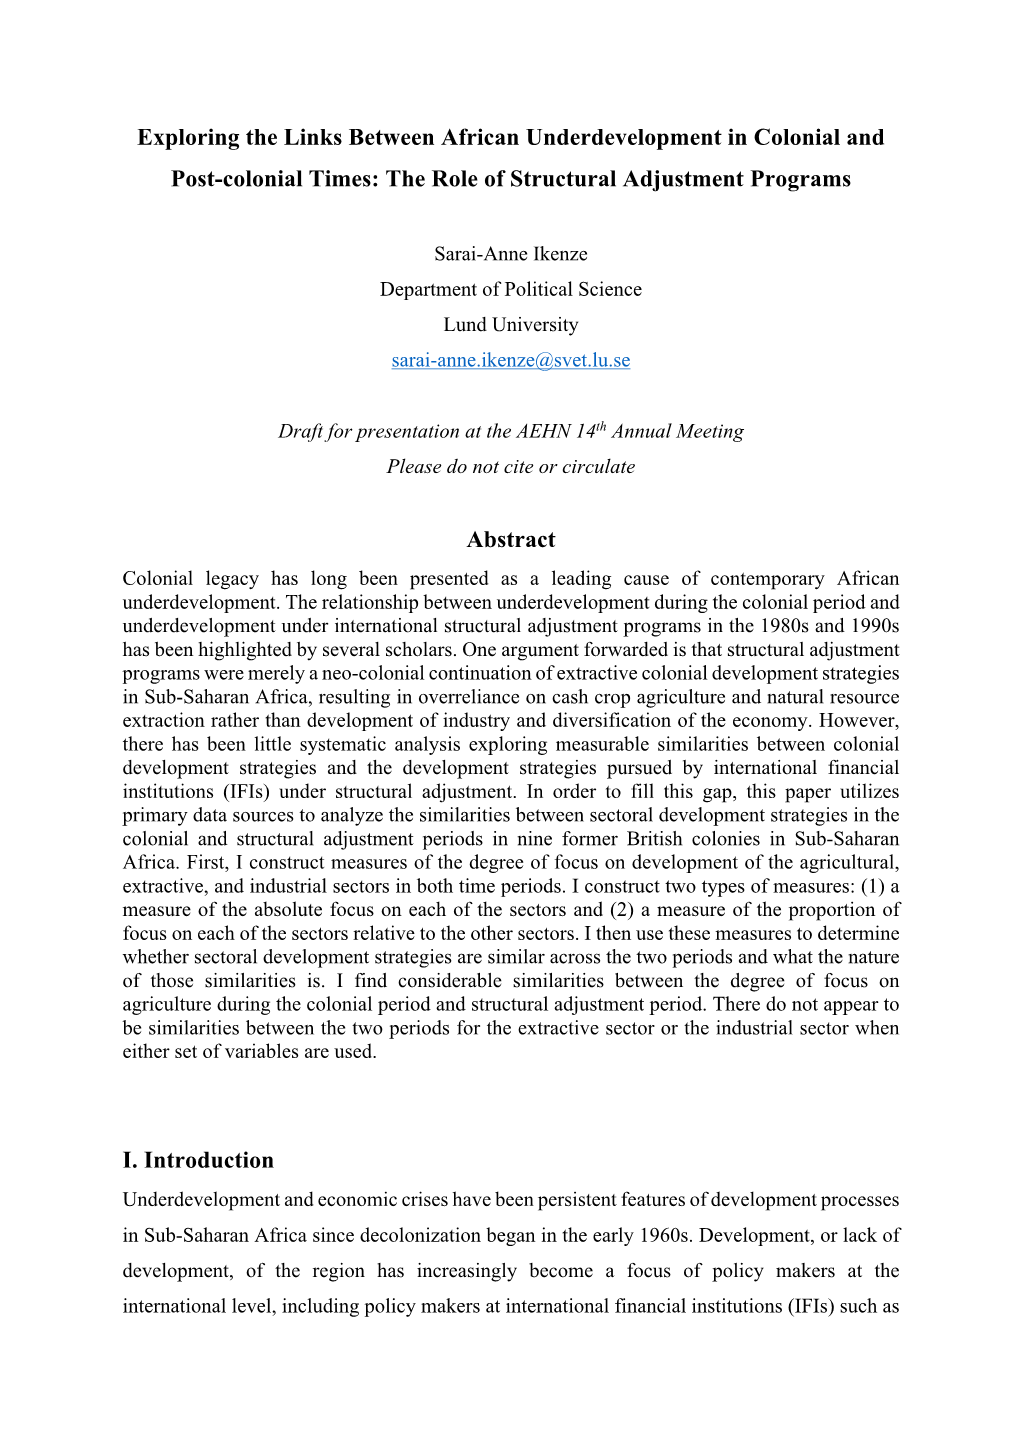 Exploring the Links Between African Underdevelopment in Colonial and Post-Colonial Times: the Role of Structural Adjustment Programs